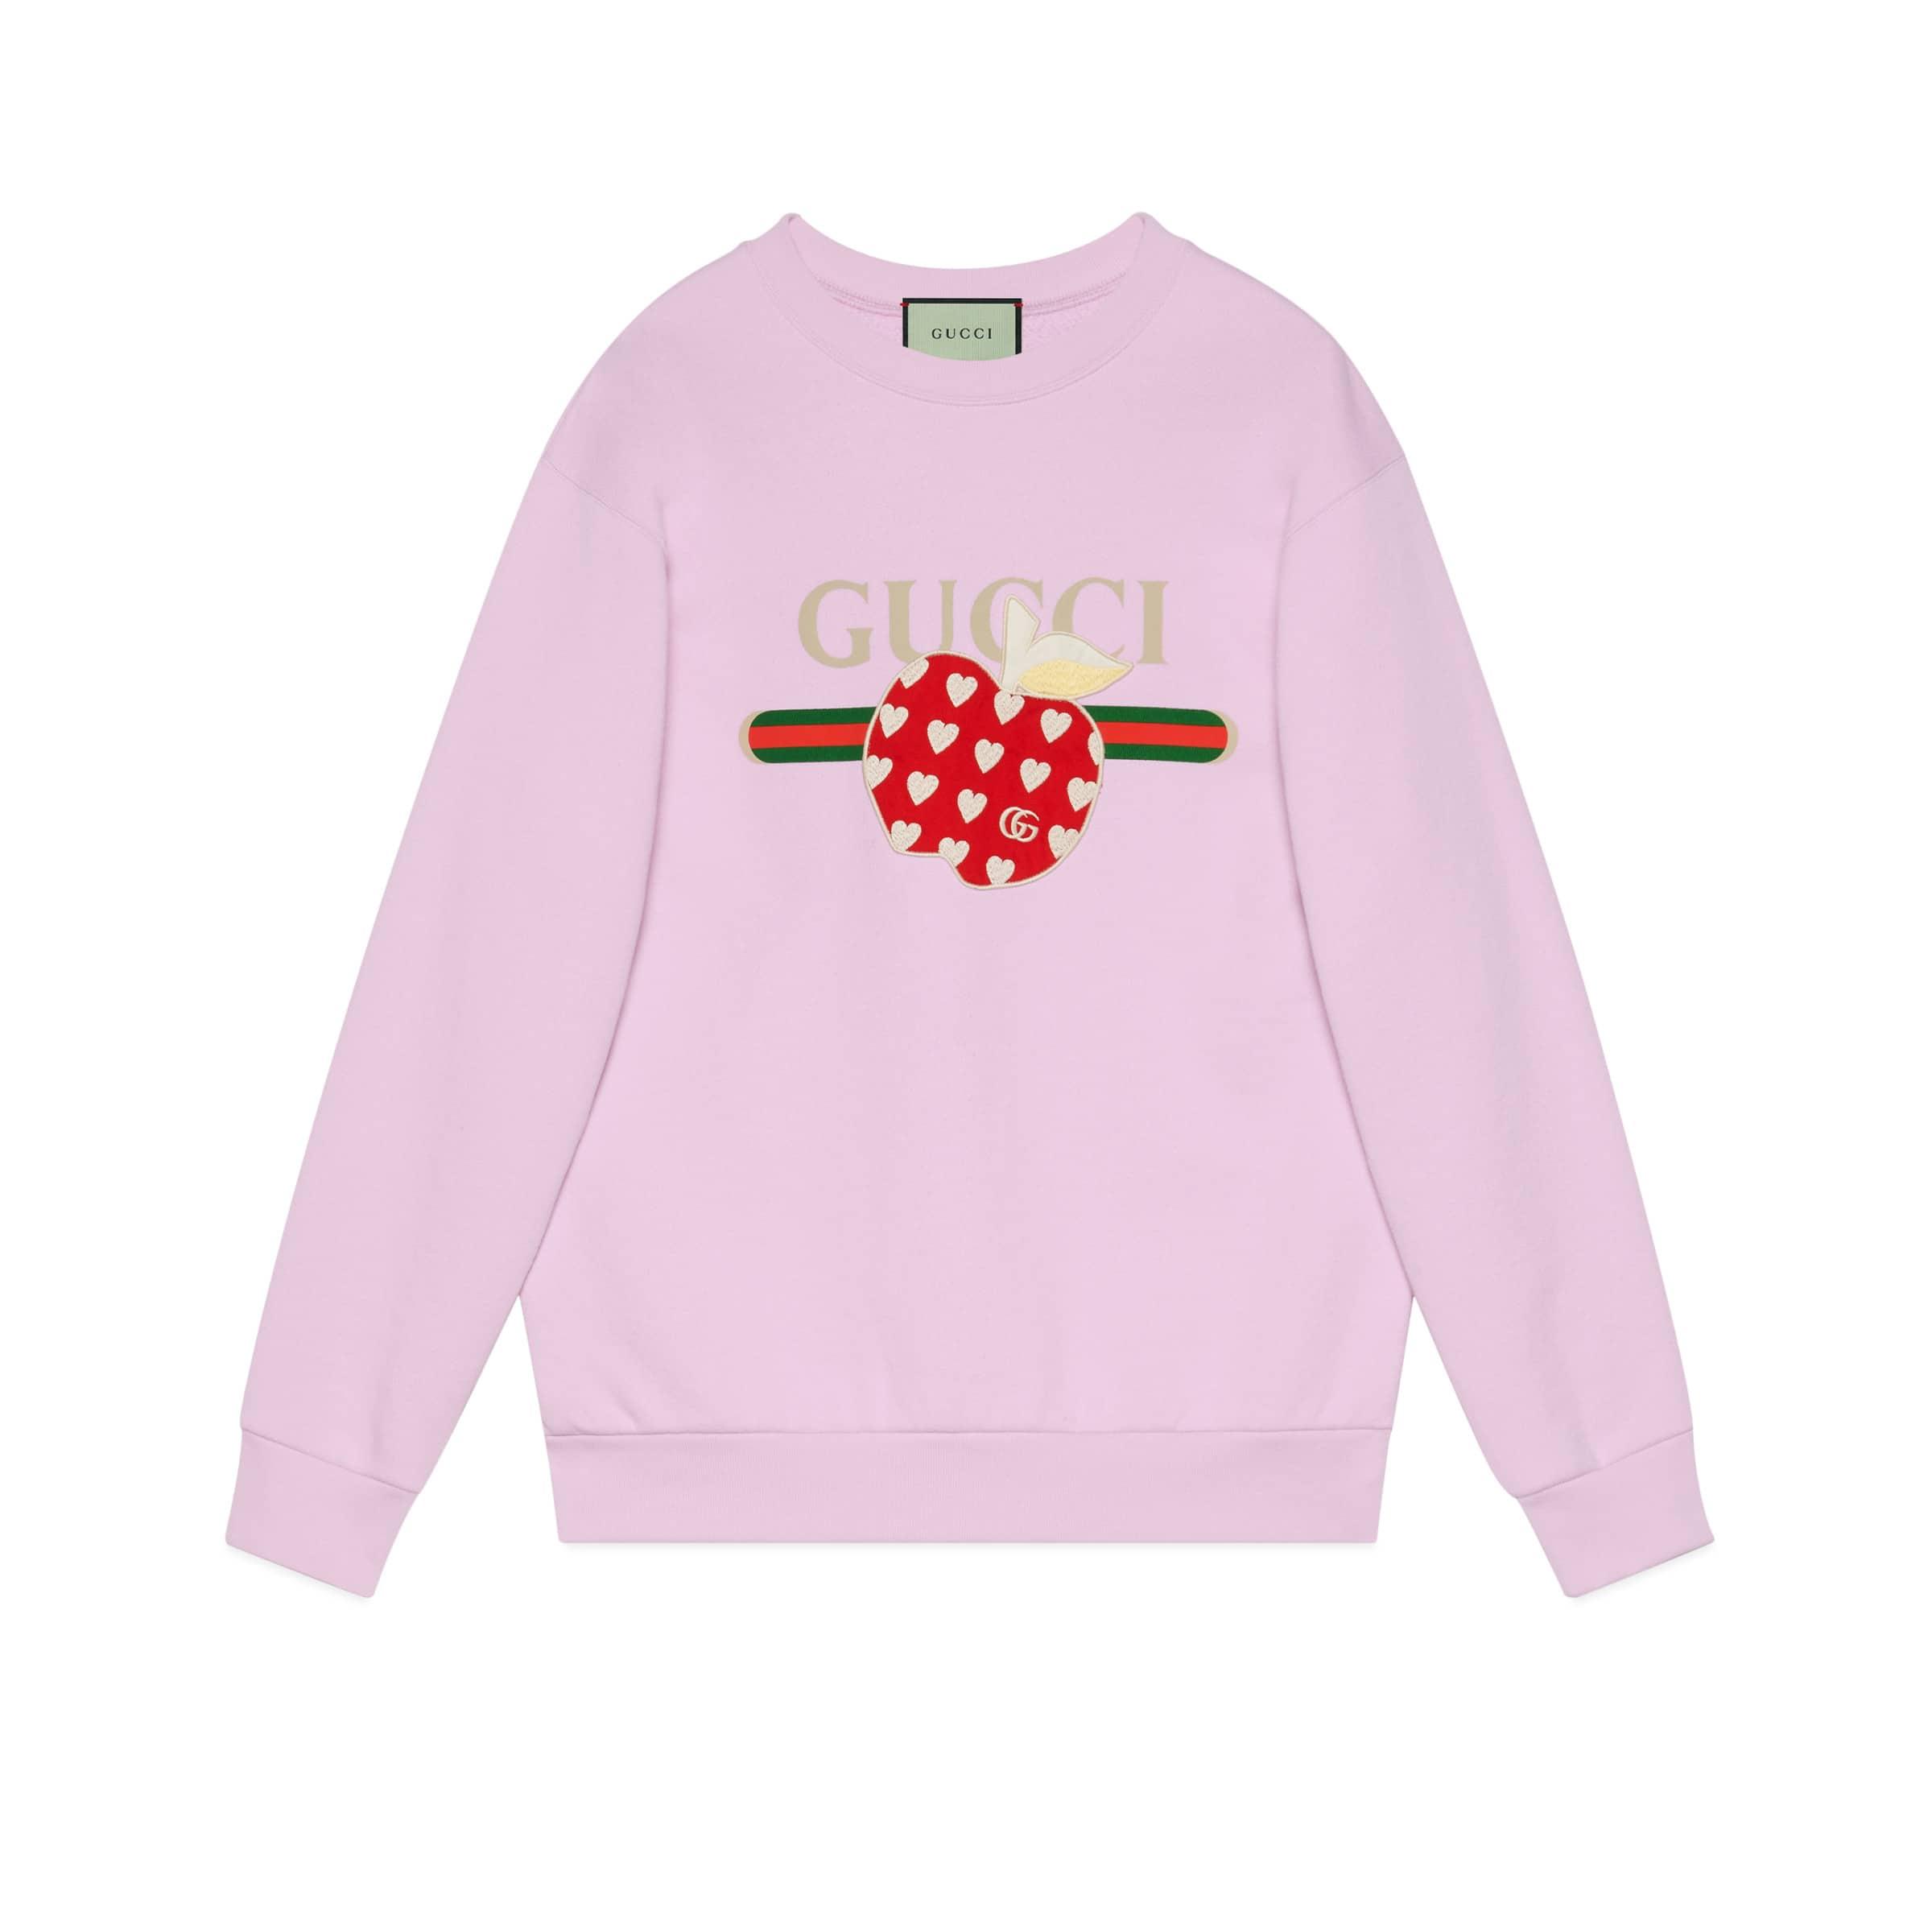 Gucci Les Pommes Sweatshirt in Pink | Lyst